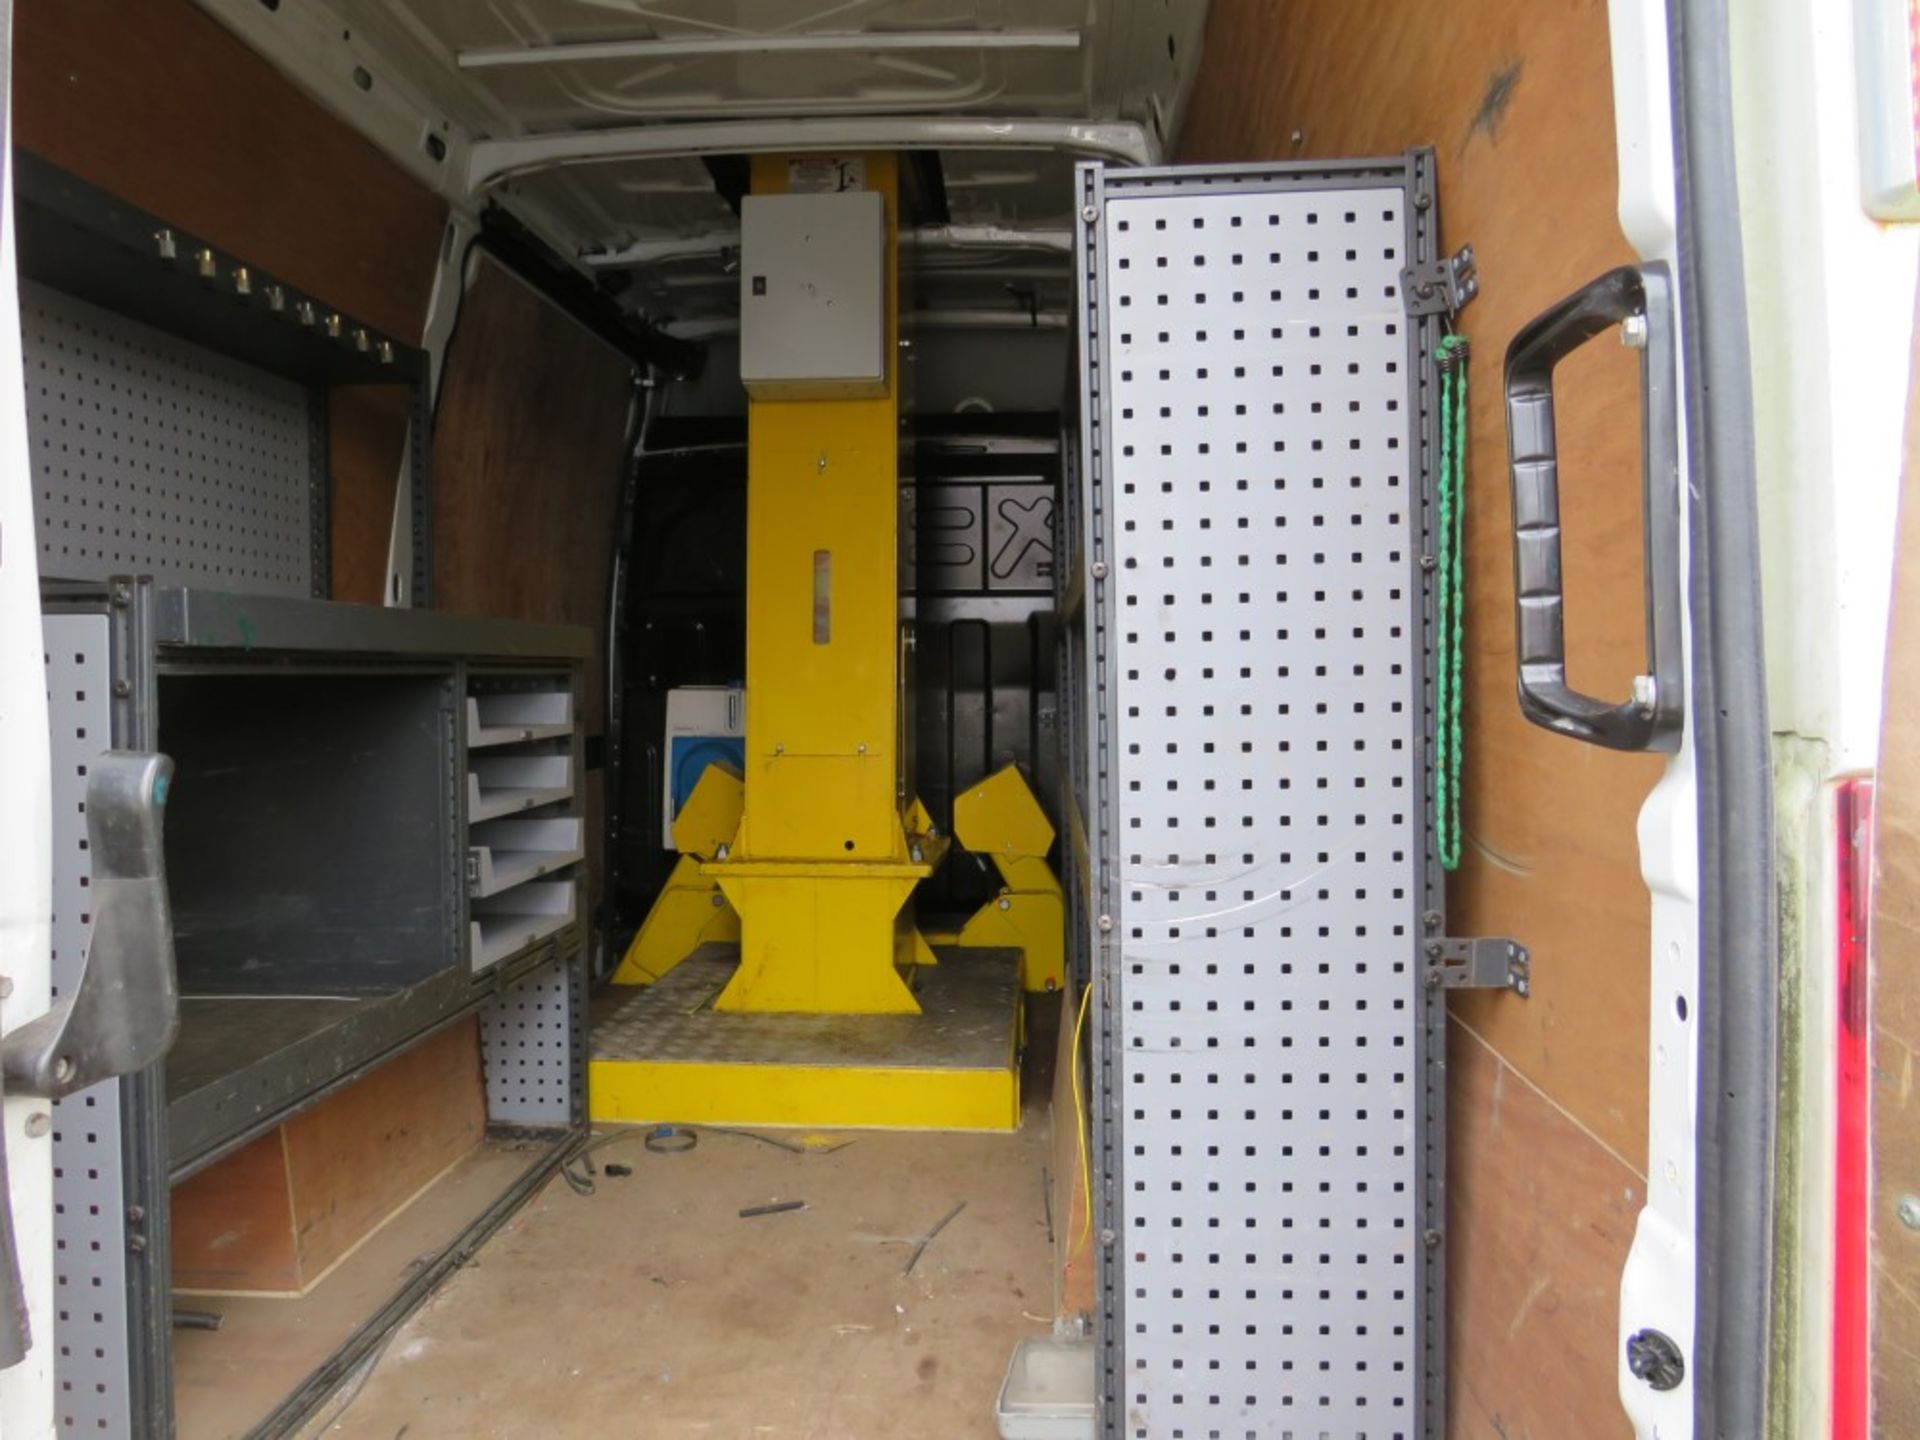 62 reg IVECO DAILY CHERRY PICKER (RUNS, DRIVES BUT IN LIMP MODE EGR FAULT) (DIRECT COUNCIL) [+ VAT] - Image 5 of 8